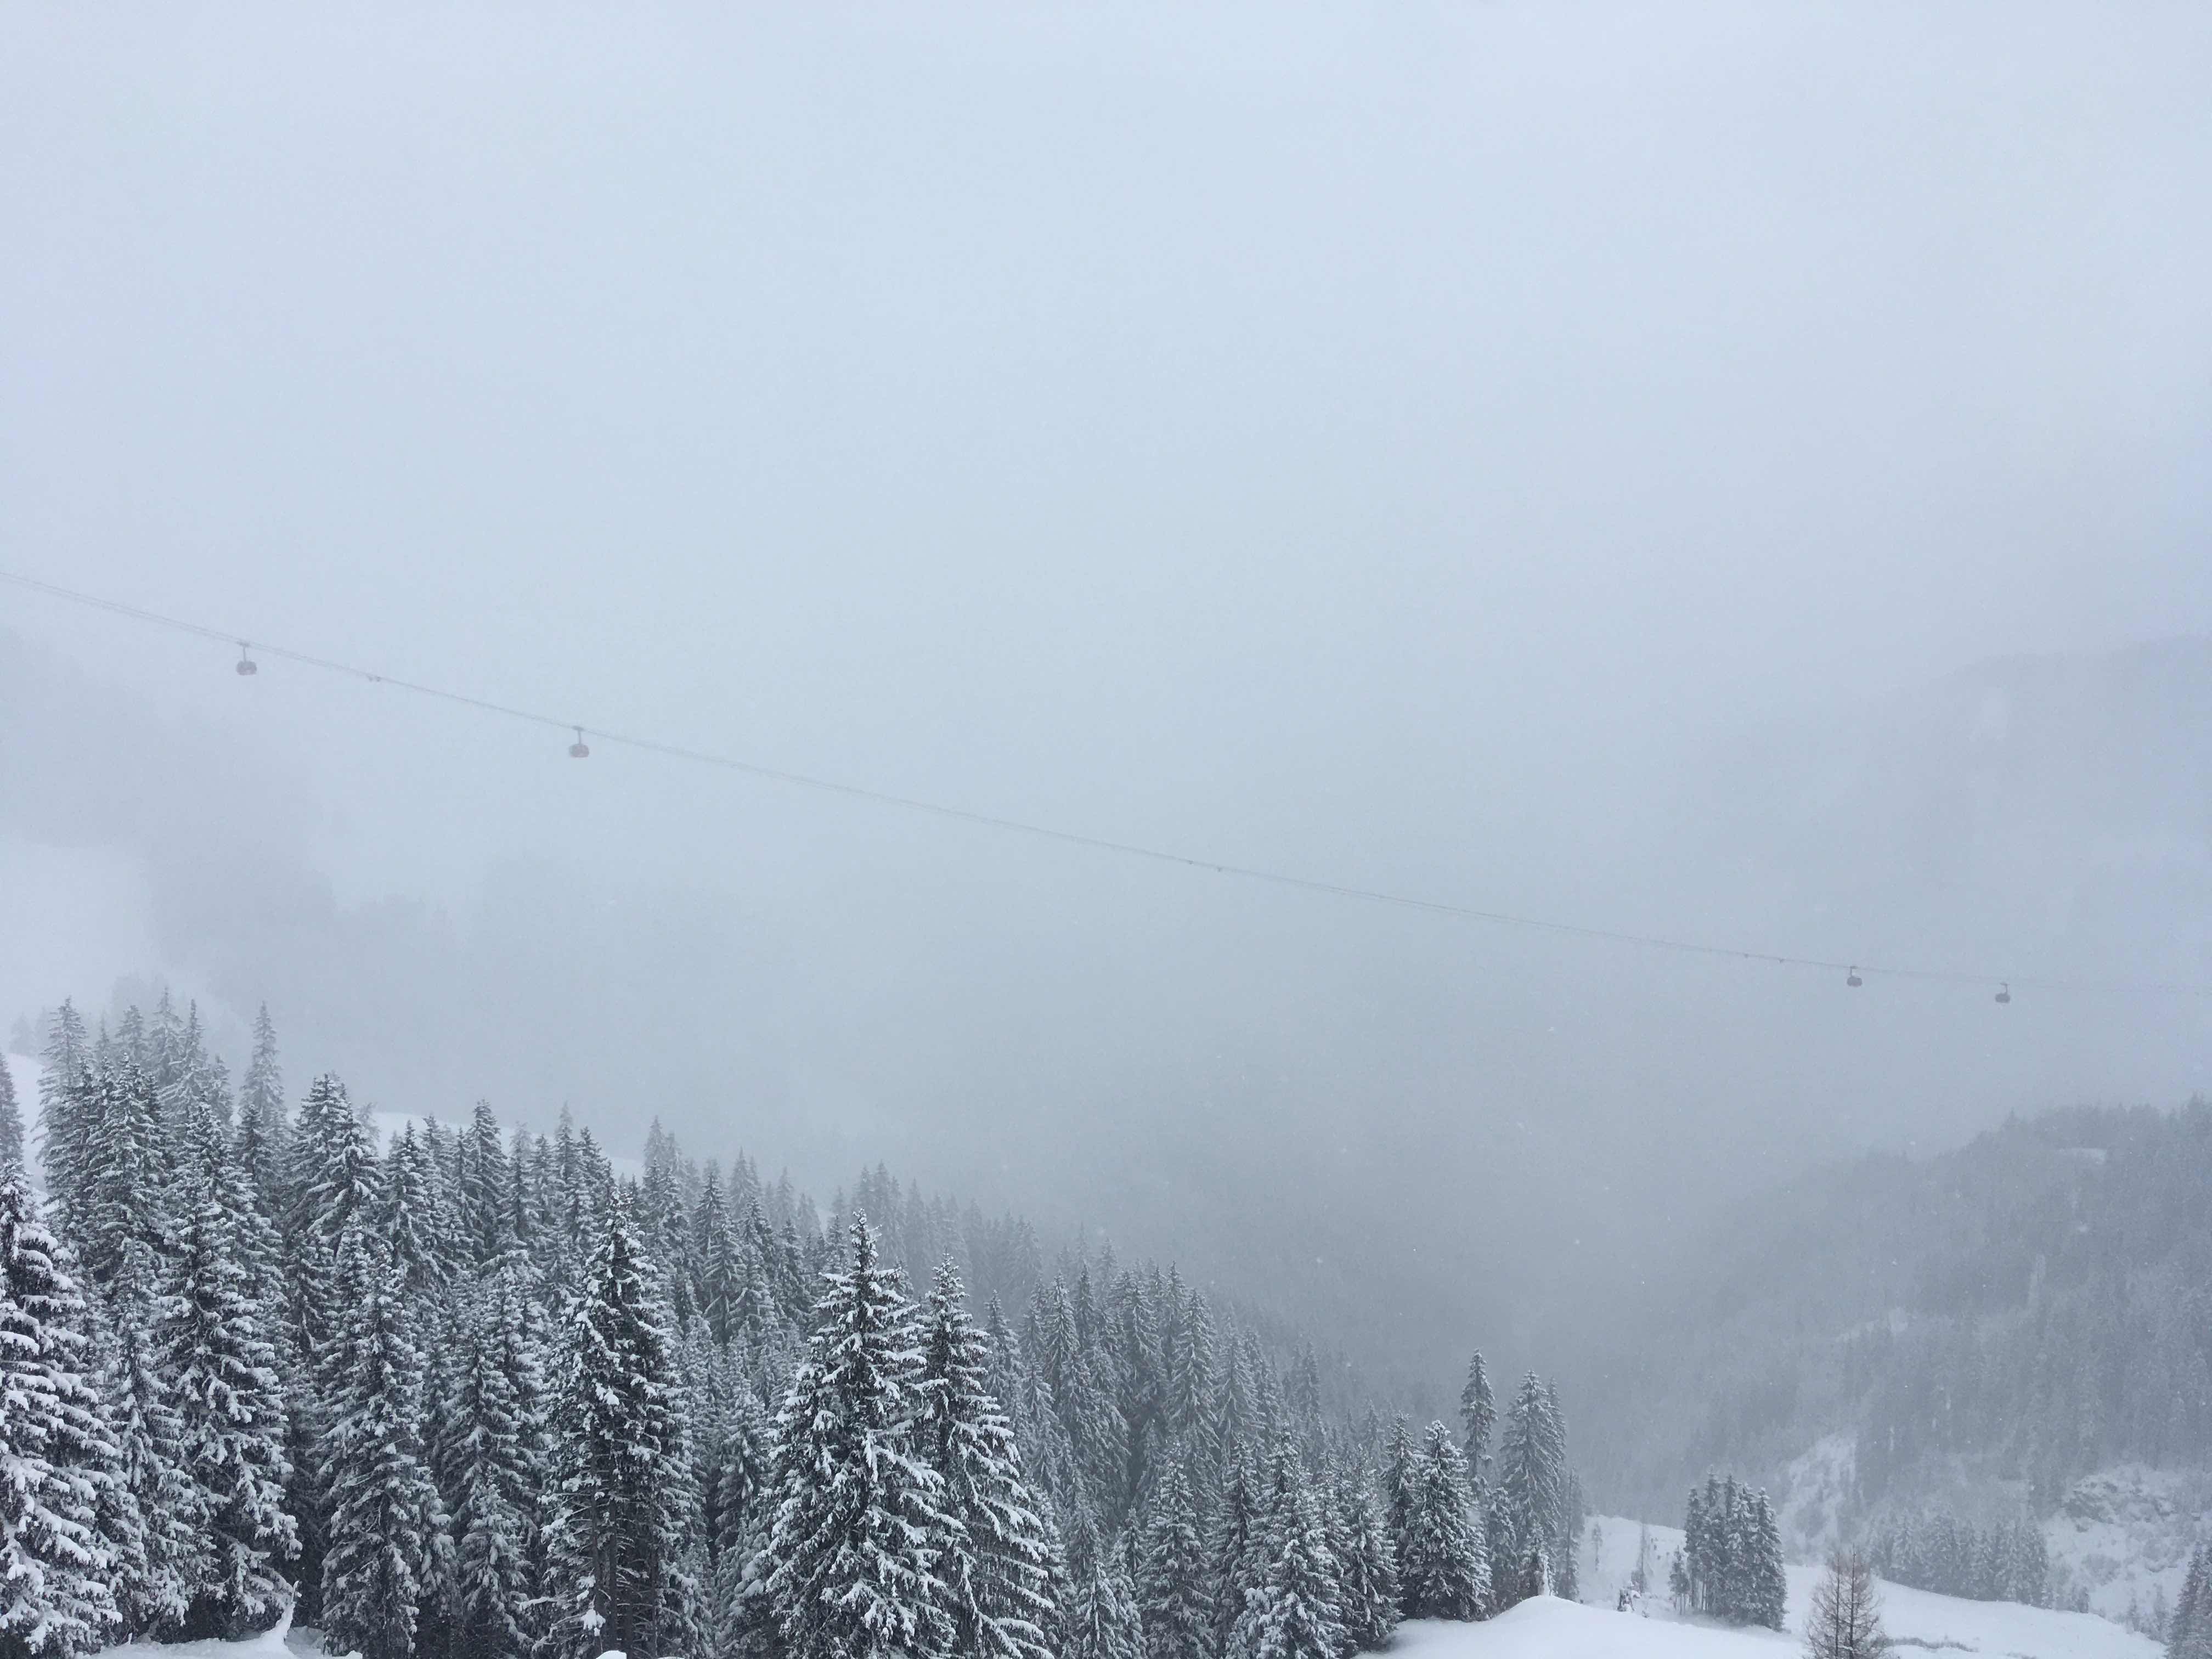 Distant view of skiing gondola fading in the clouds, with snow covered trees in foreground.